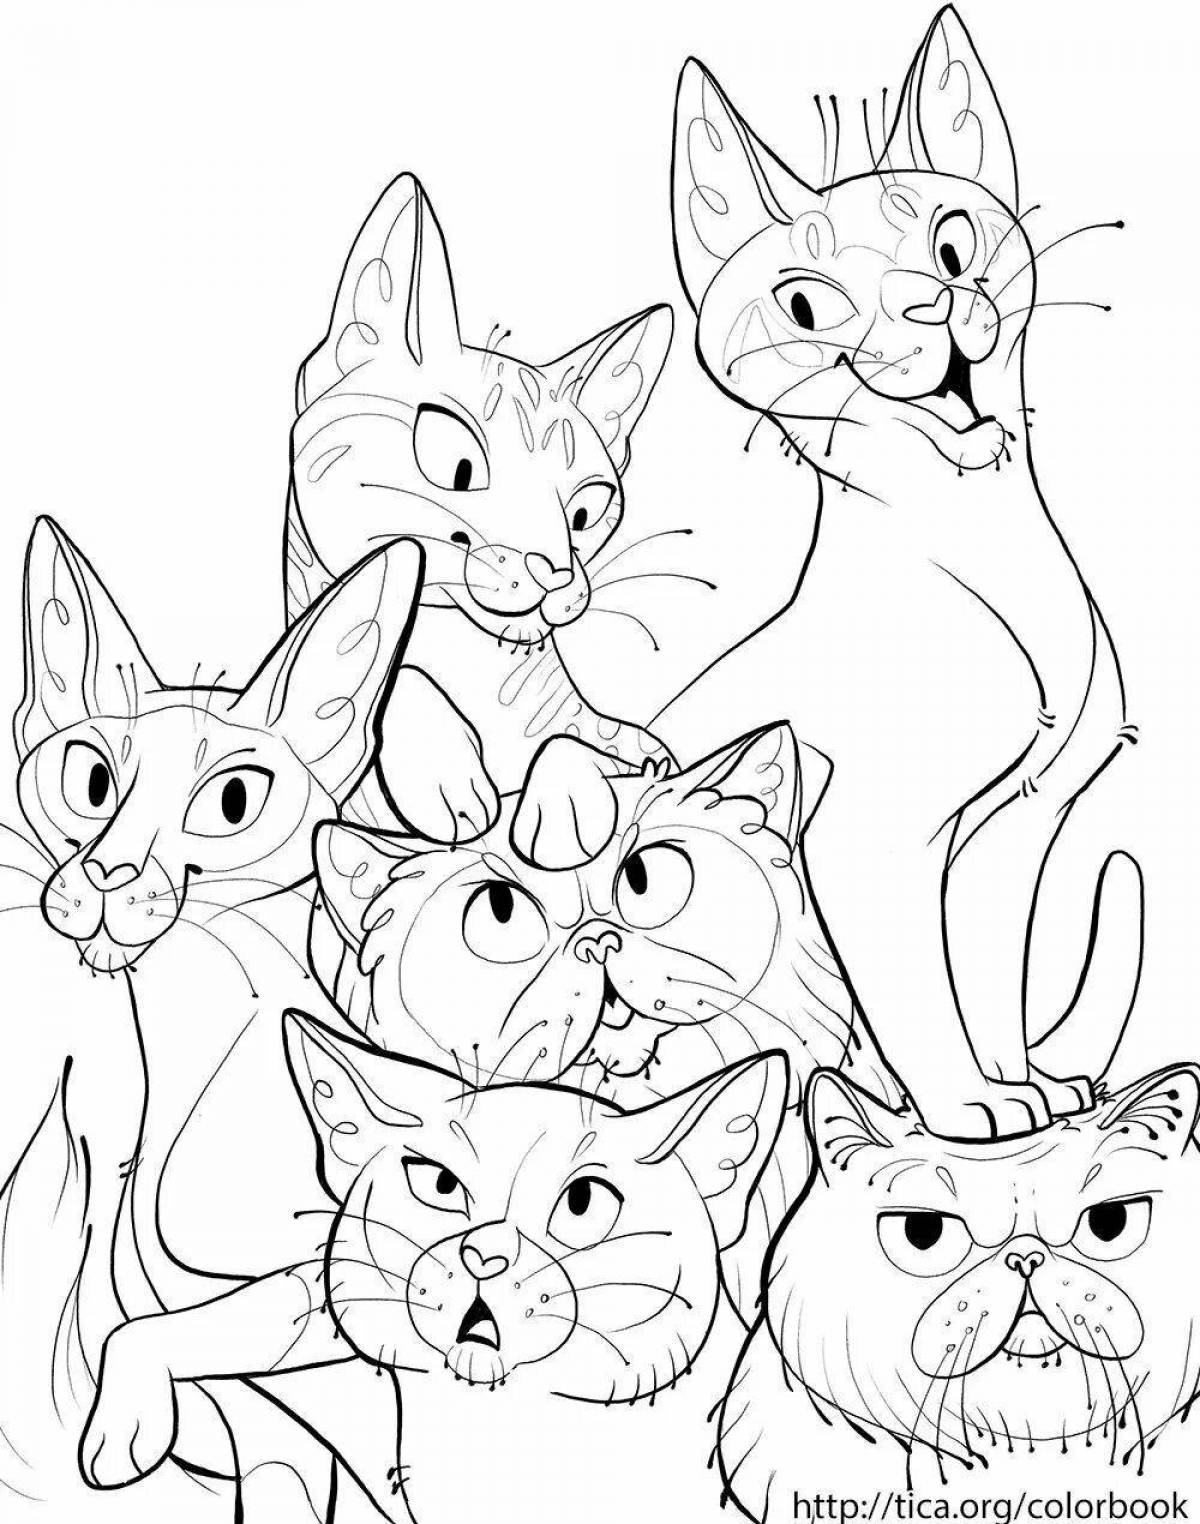 Coloring page graceful cats